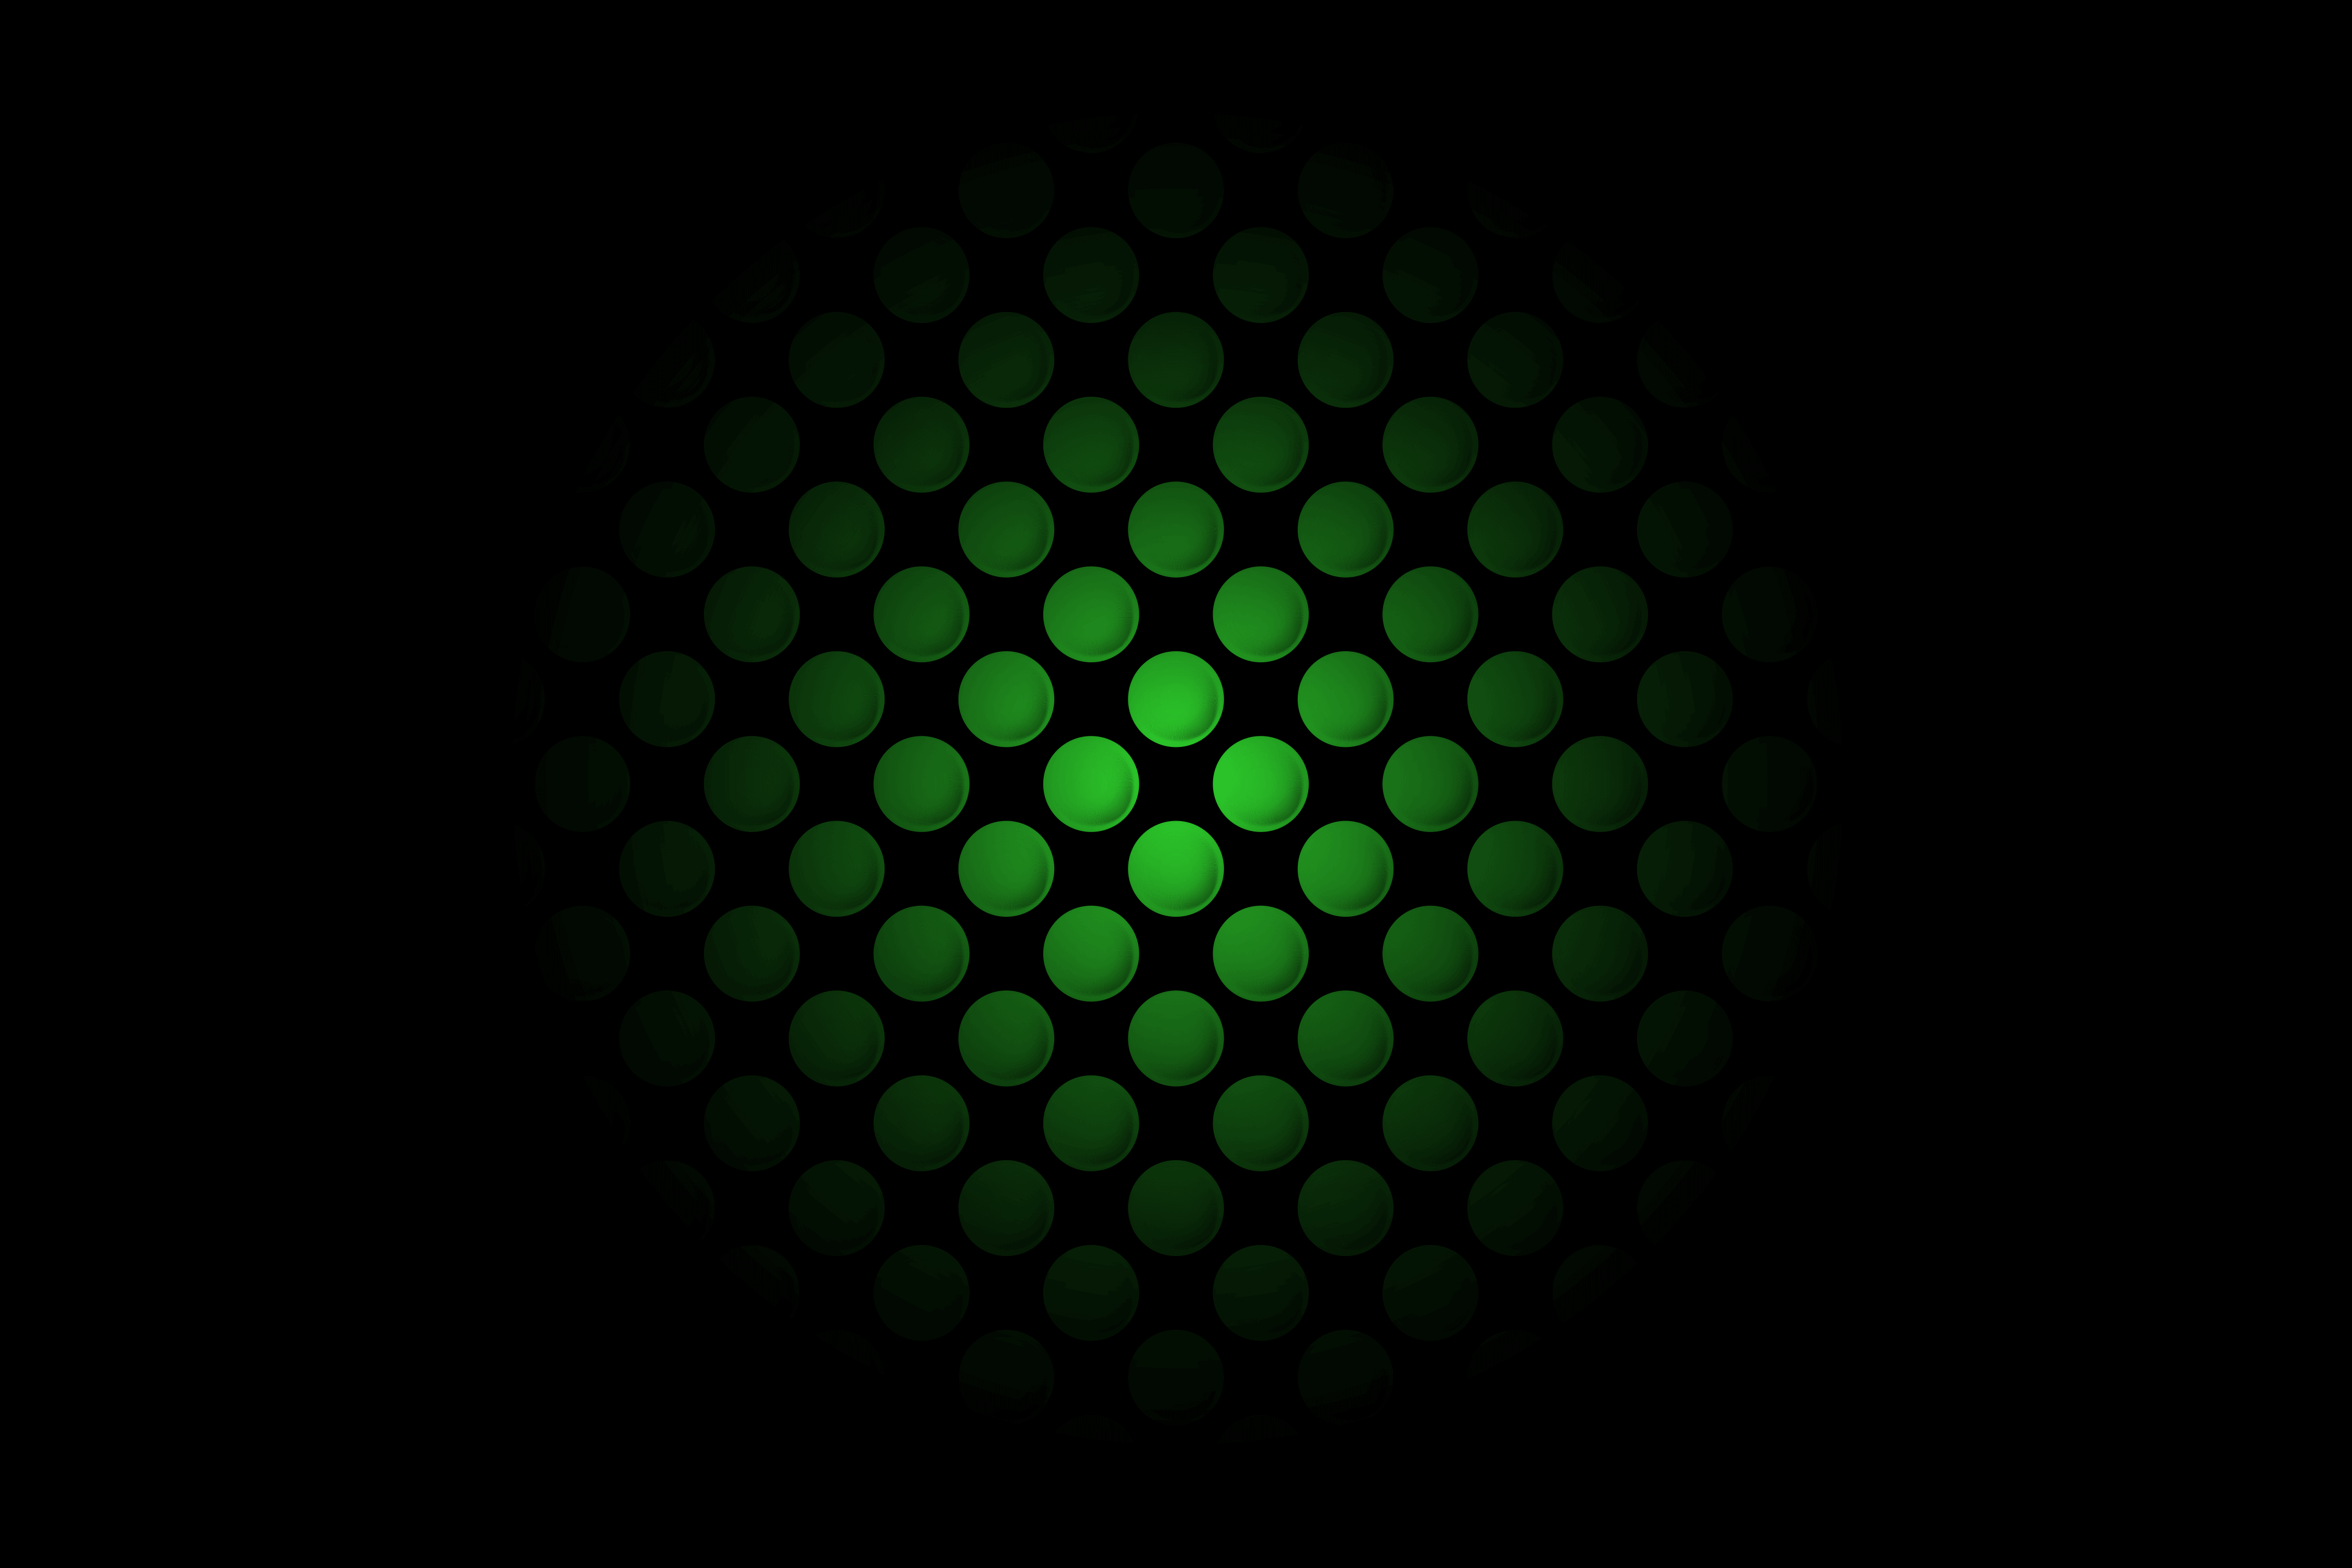 Awesome designs of Xbox series x green background For gamers and Xbox fans